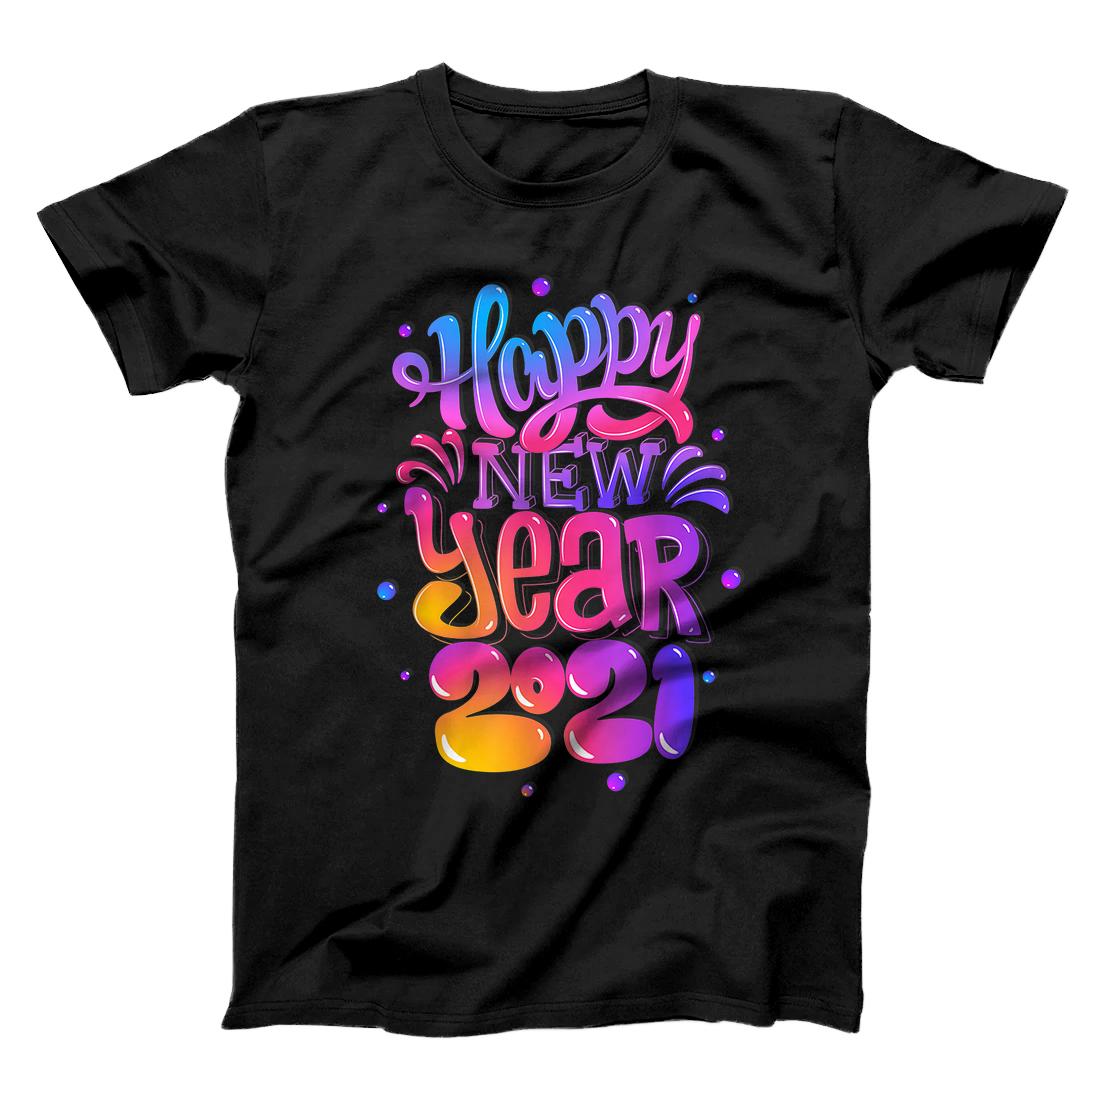 Personalized Happy New Year Shirt 2021 New Years Eve 2020 Party Supplies T-Shirt